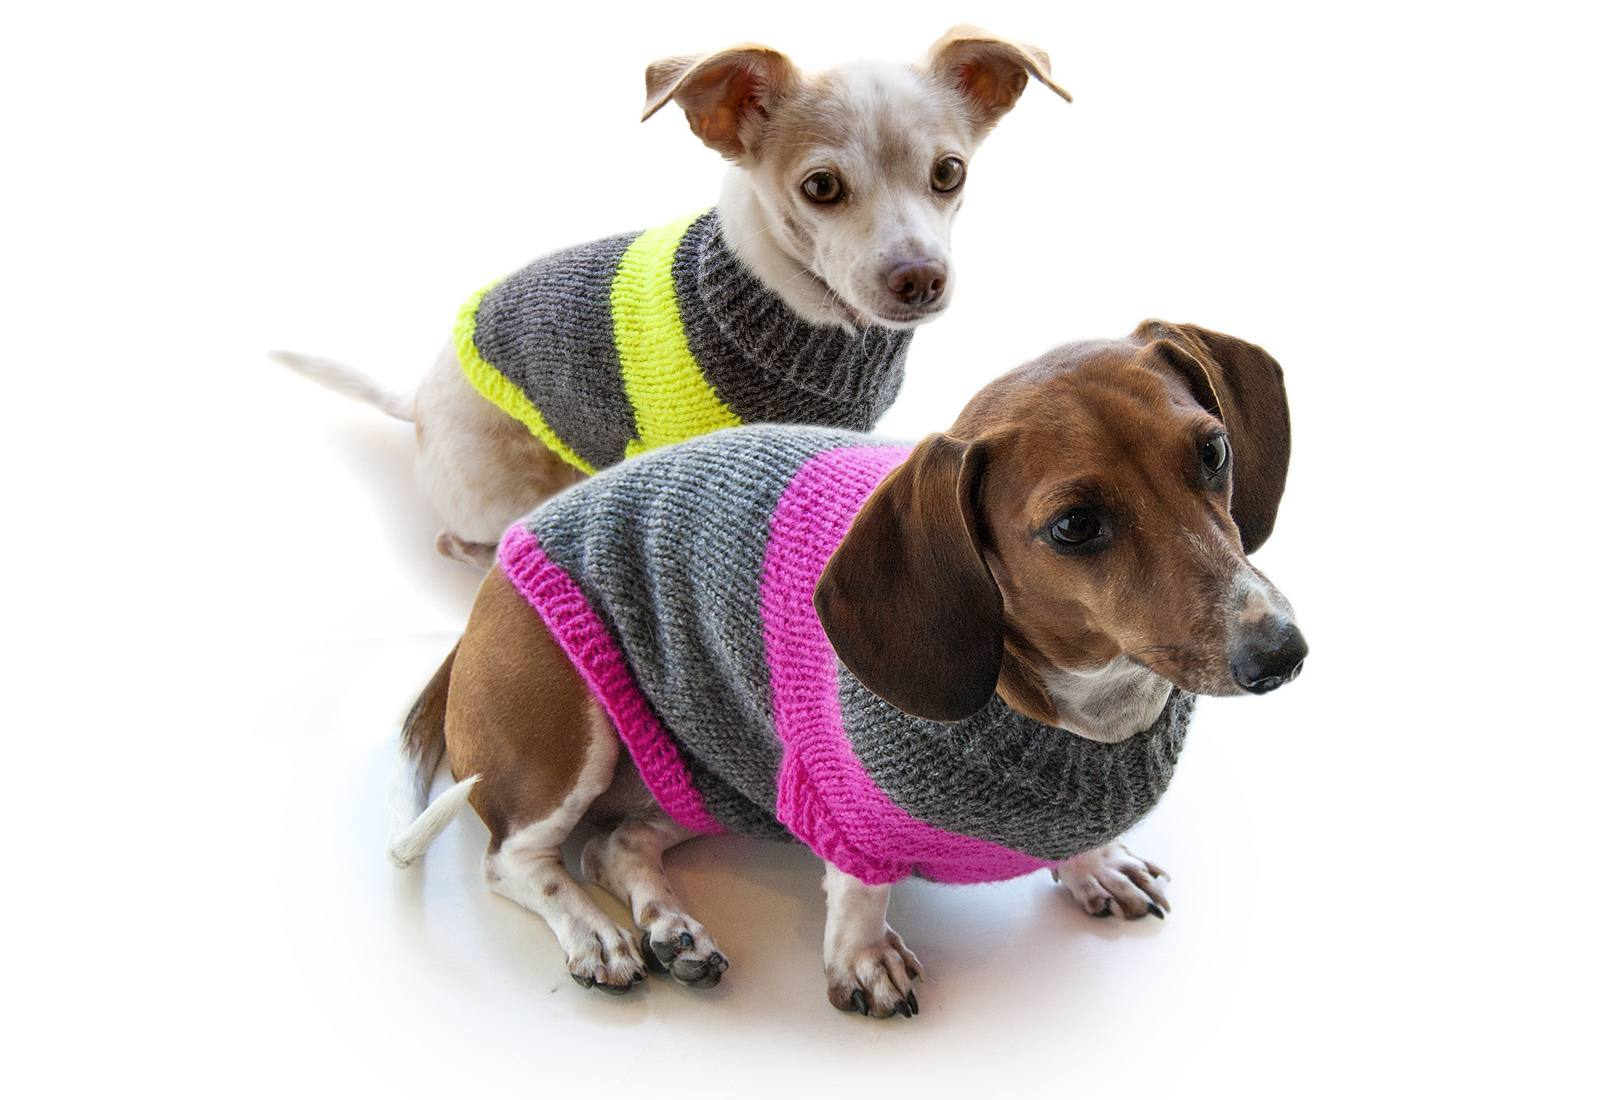 Knitted Dog Coat Pattern 12 Dog Sweaters And Other Knitting Patterns For Pups